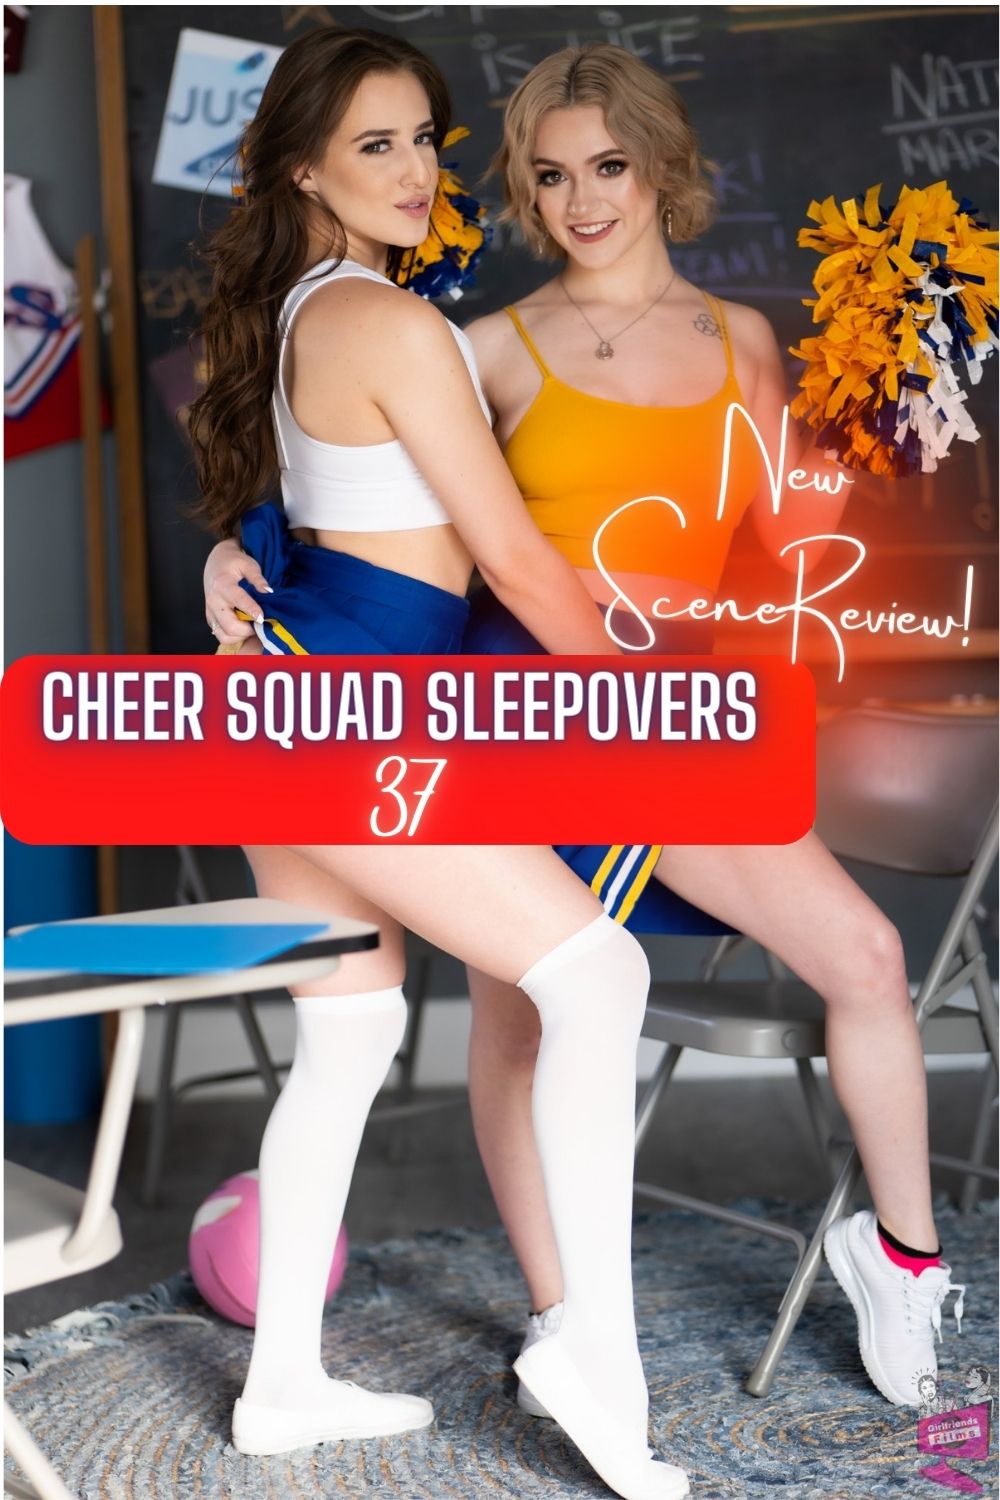 Girlfriends Films Press On Twitter Roger T Pipe Reviews Two Scenes In Cheer Squad 37